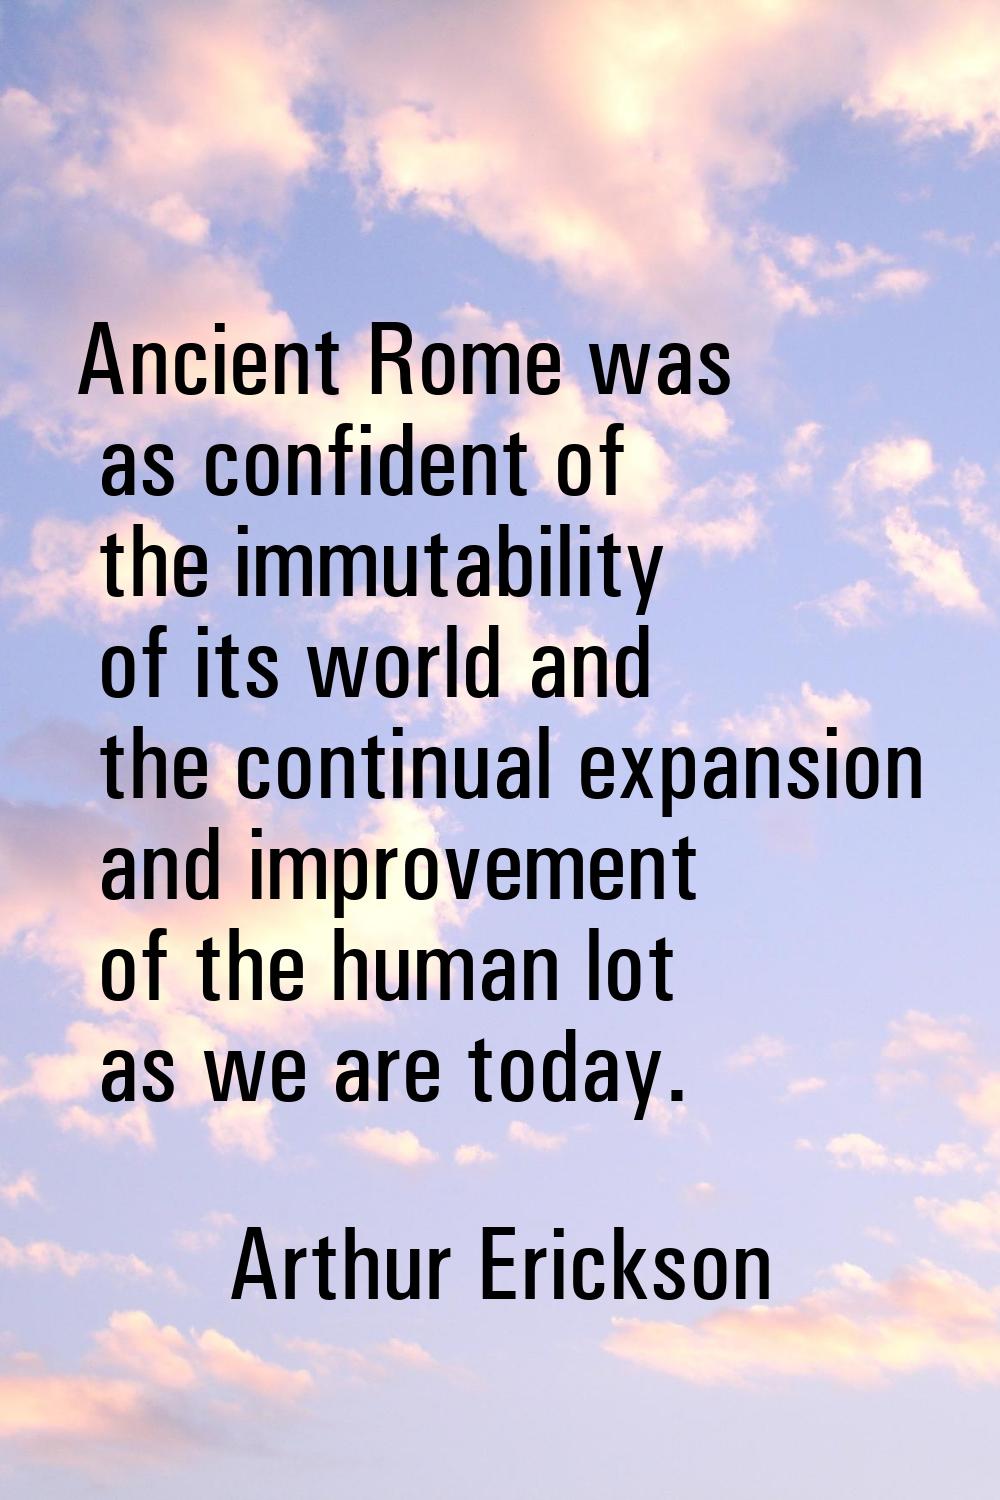 Ancient Rome was as confident of the immutability of its world and the continual expansion and impr